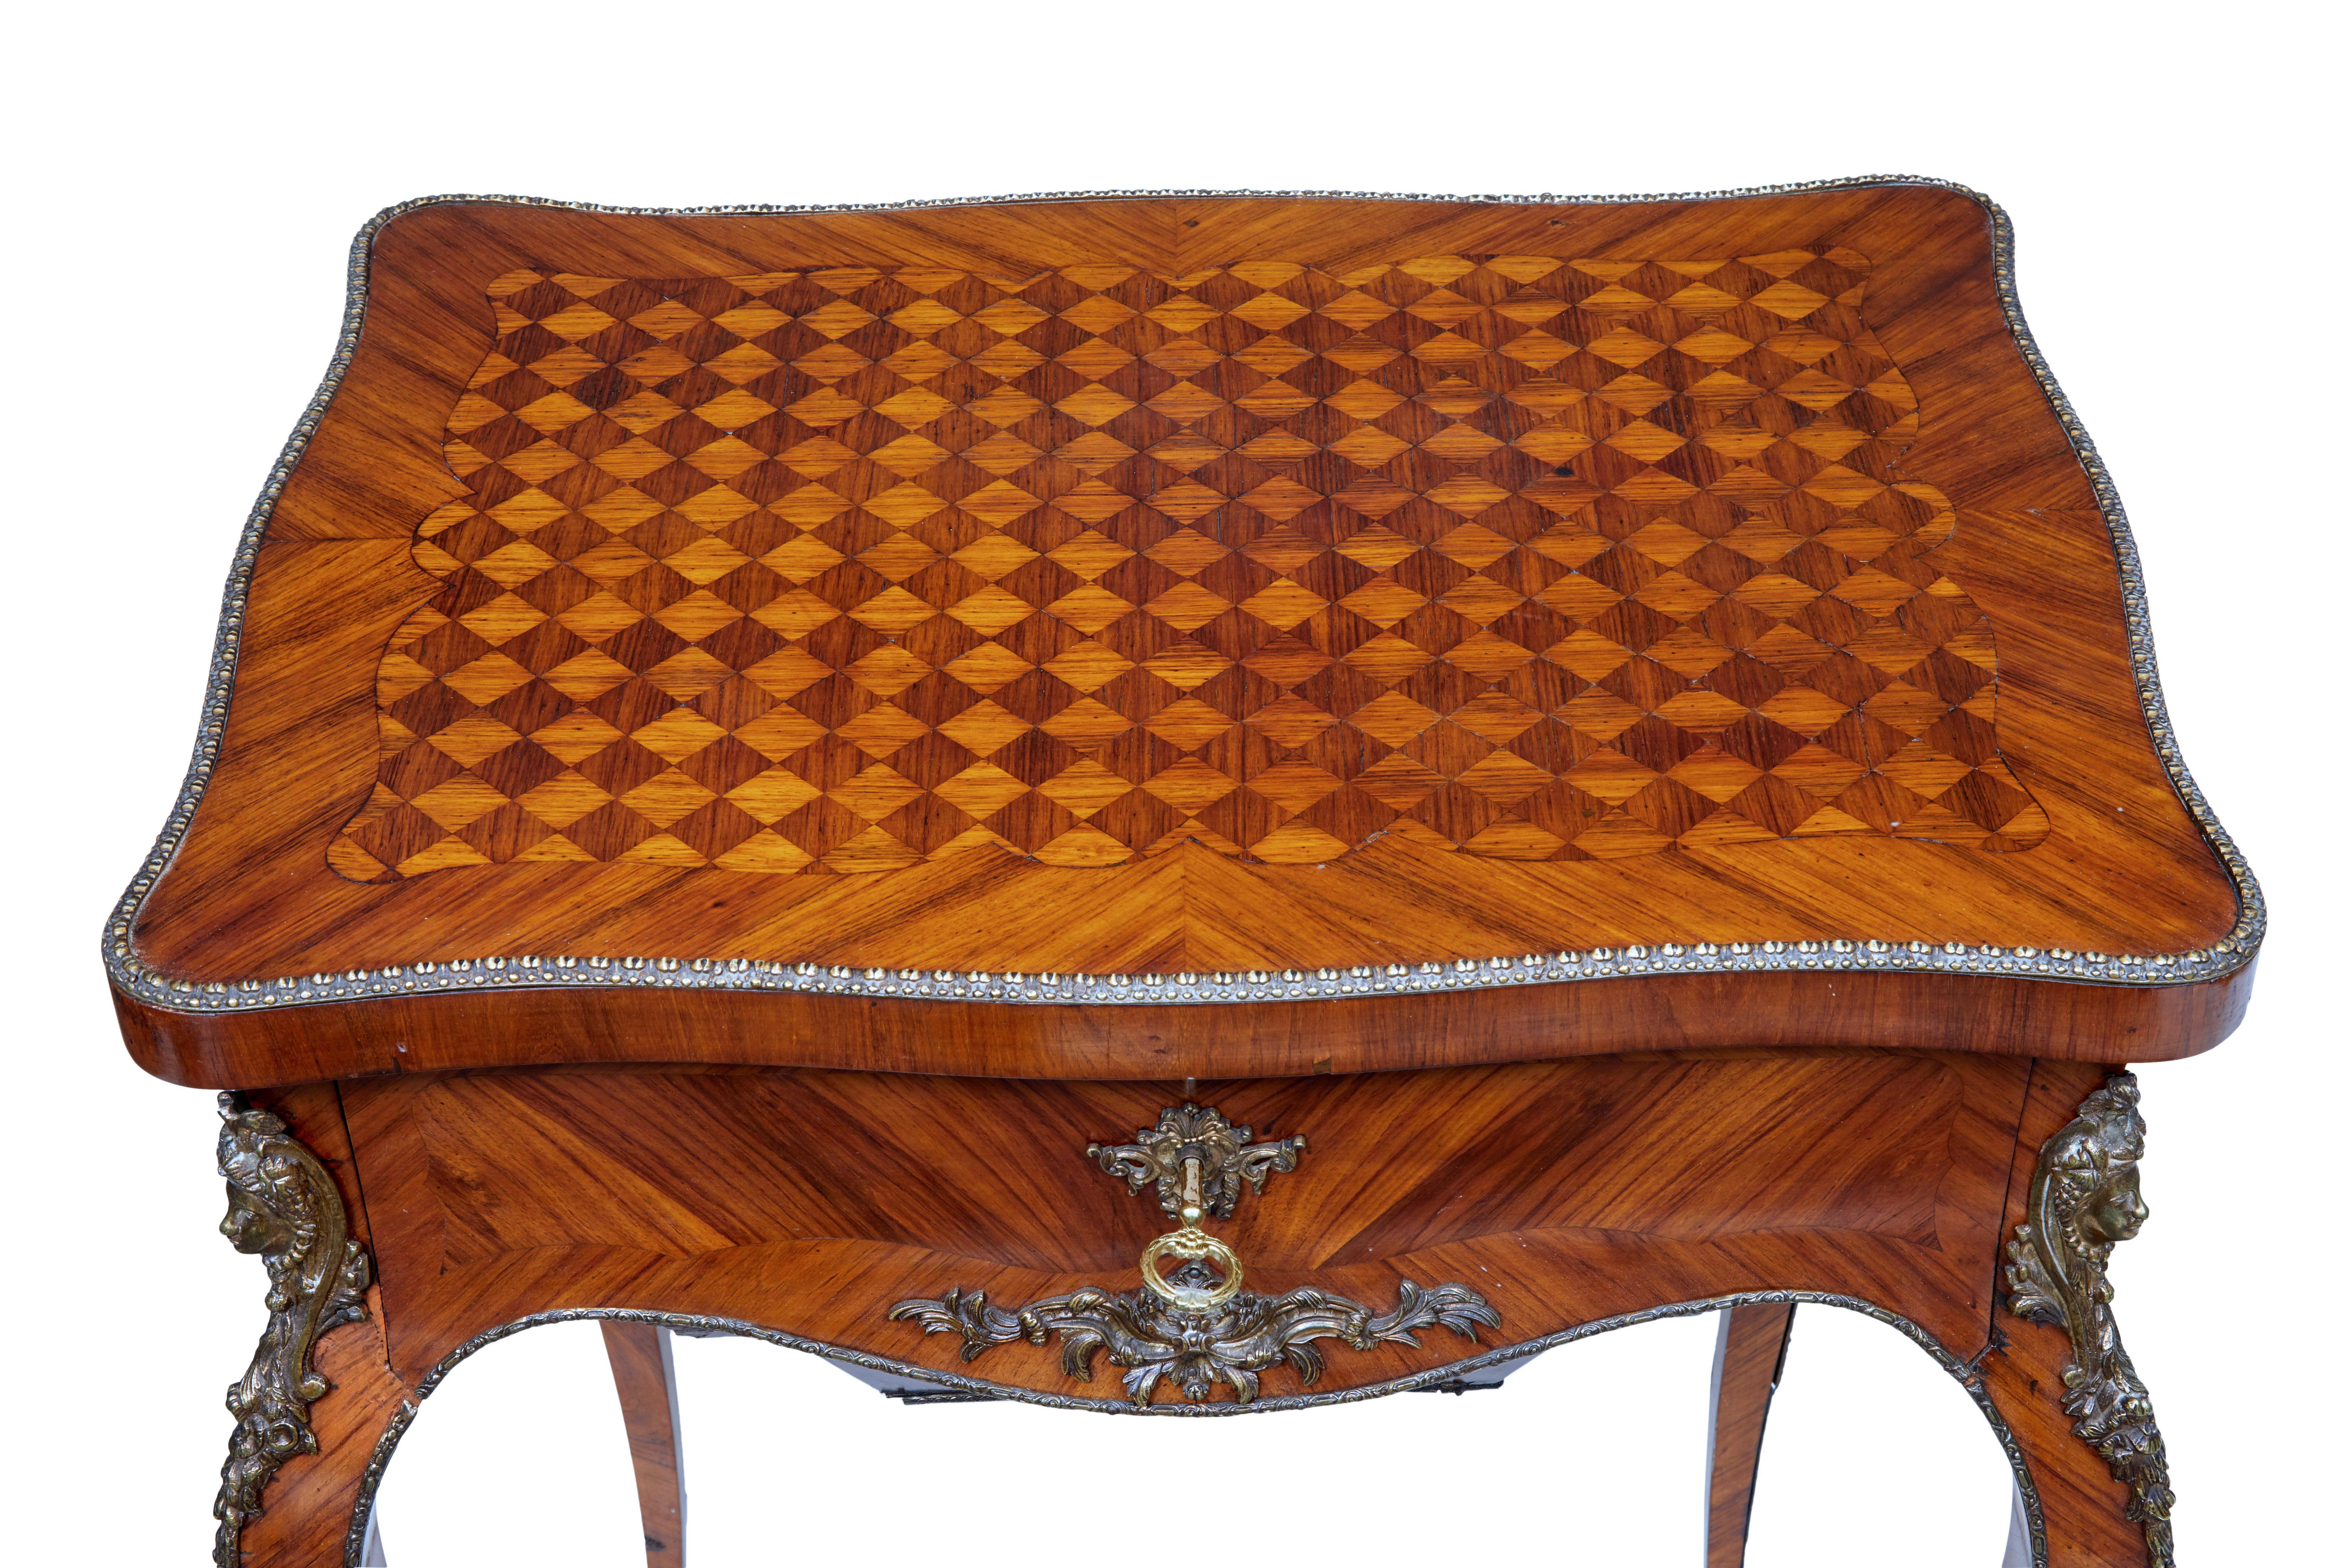 19th Century 19th century French kingwood sewing work table For Sale